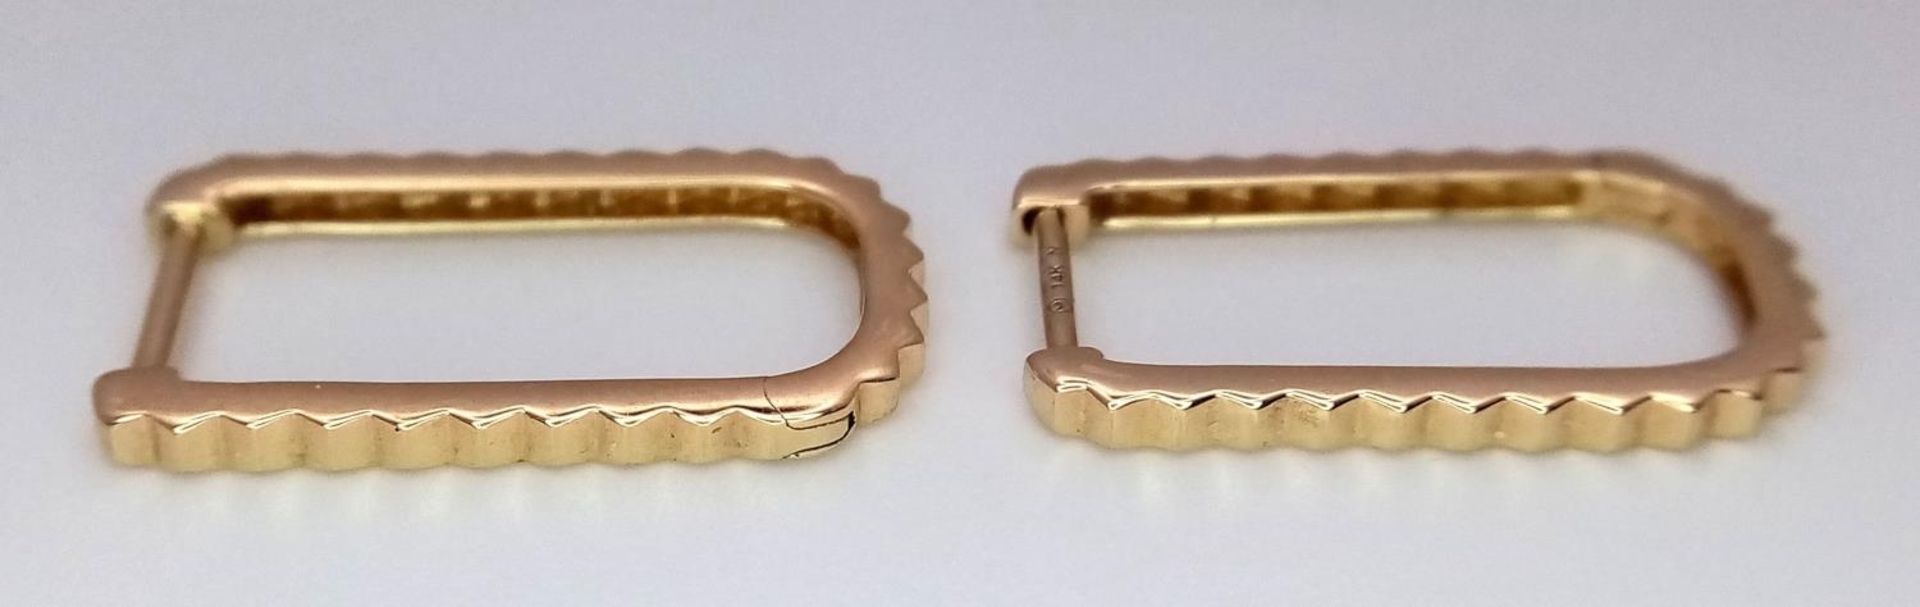 A Pair of Designer 14K Gold and Diamond Massika Rectangular Earrings. 1.7g total weight. - Image 2 of 4